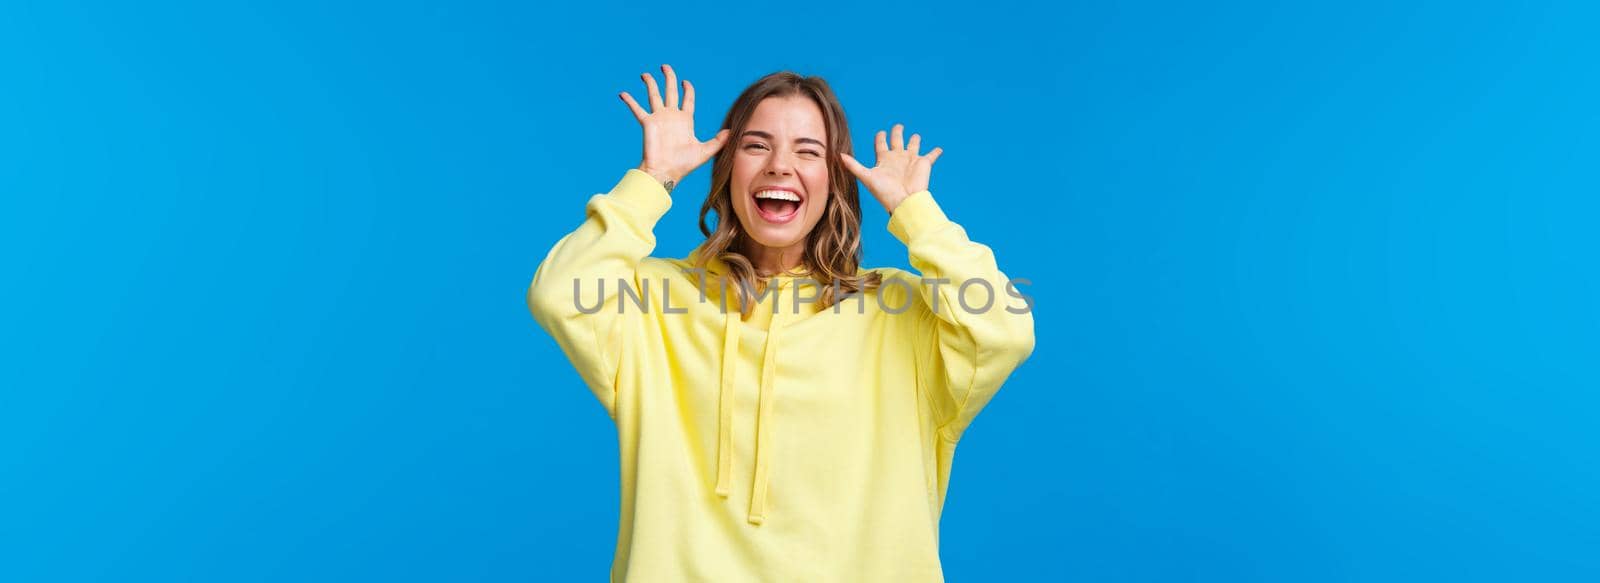 Try catch me. Alluring carefree european female with blond hair having fun, showing funny faces, laughing and smiling joyful, playing, make childish grimaces mocking someone, blue background.